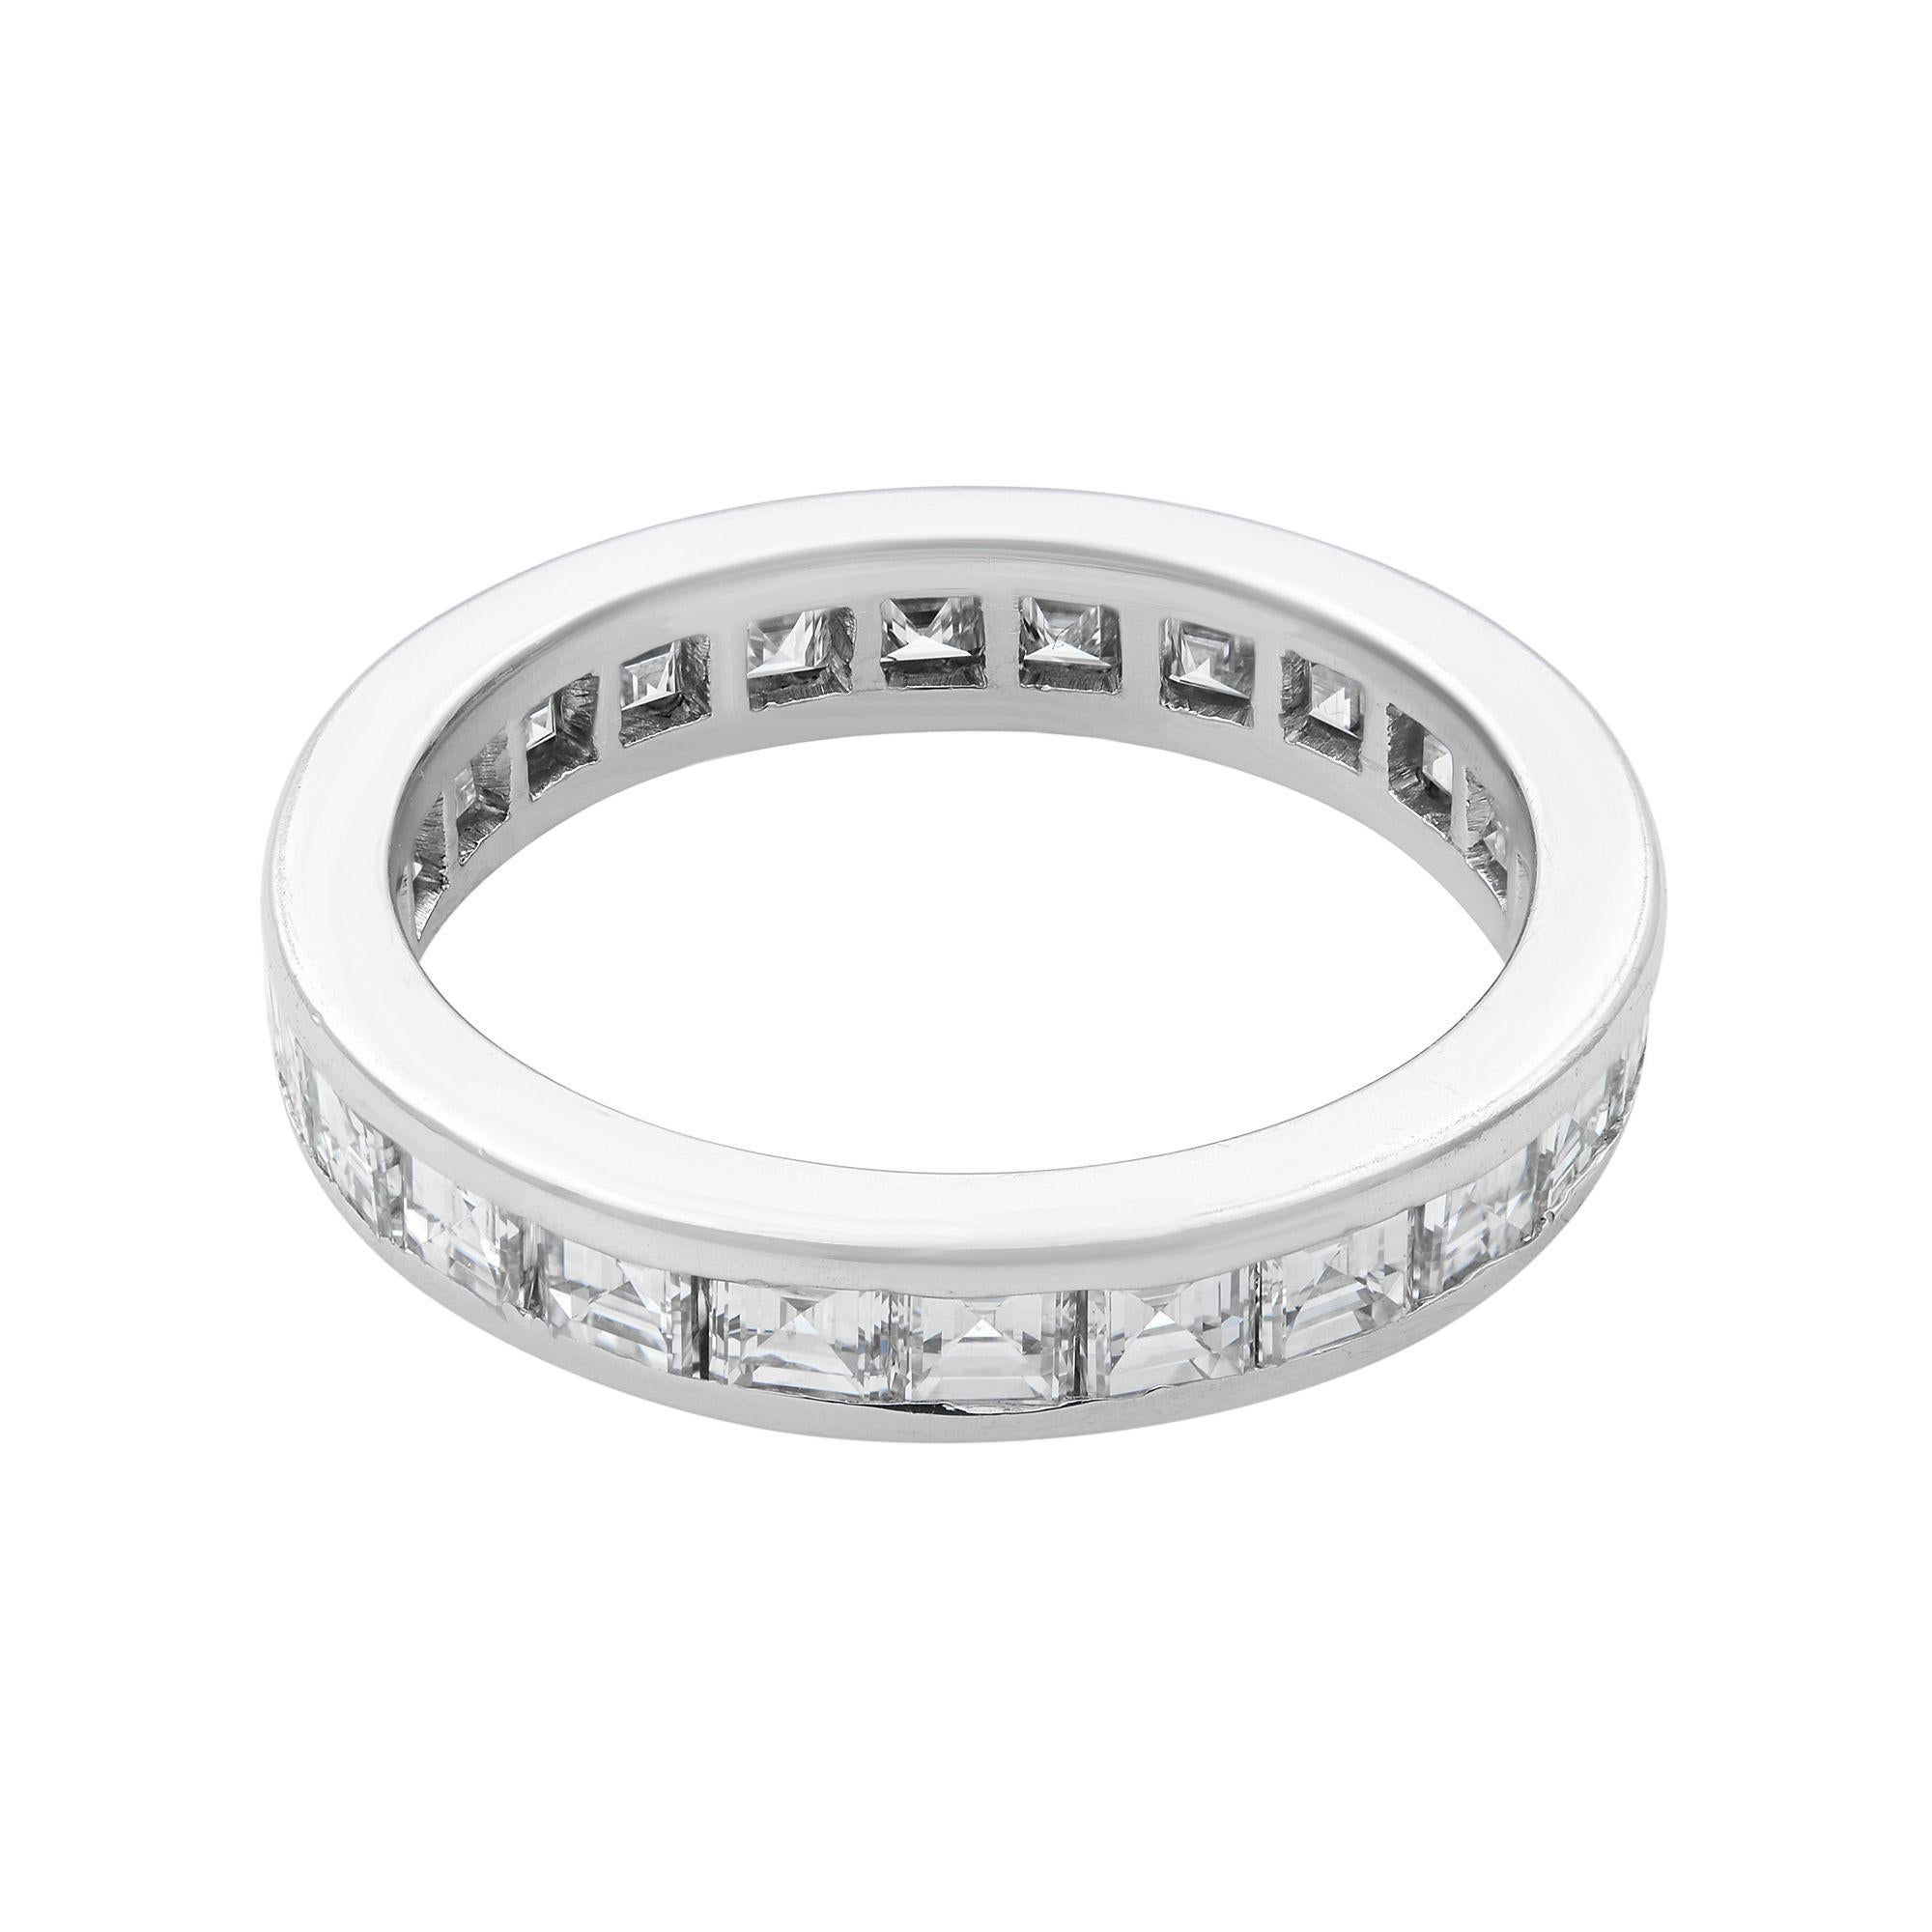 Rachel Koen Channel Square Diamond Eternity Band 14K White Gold 1.25cttw In New Condition For Sale In New York, NY